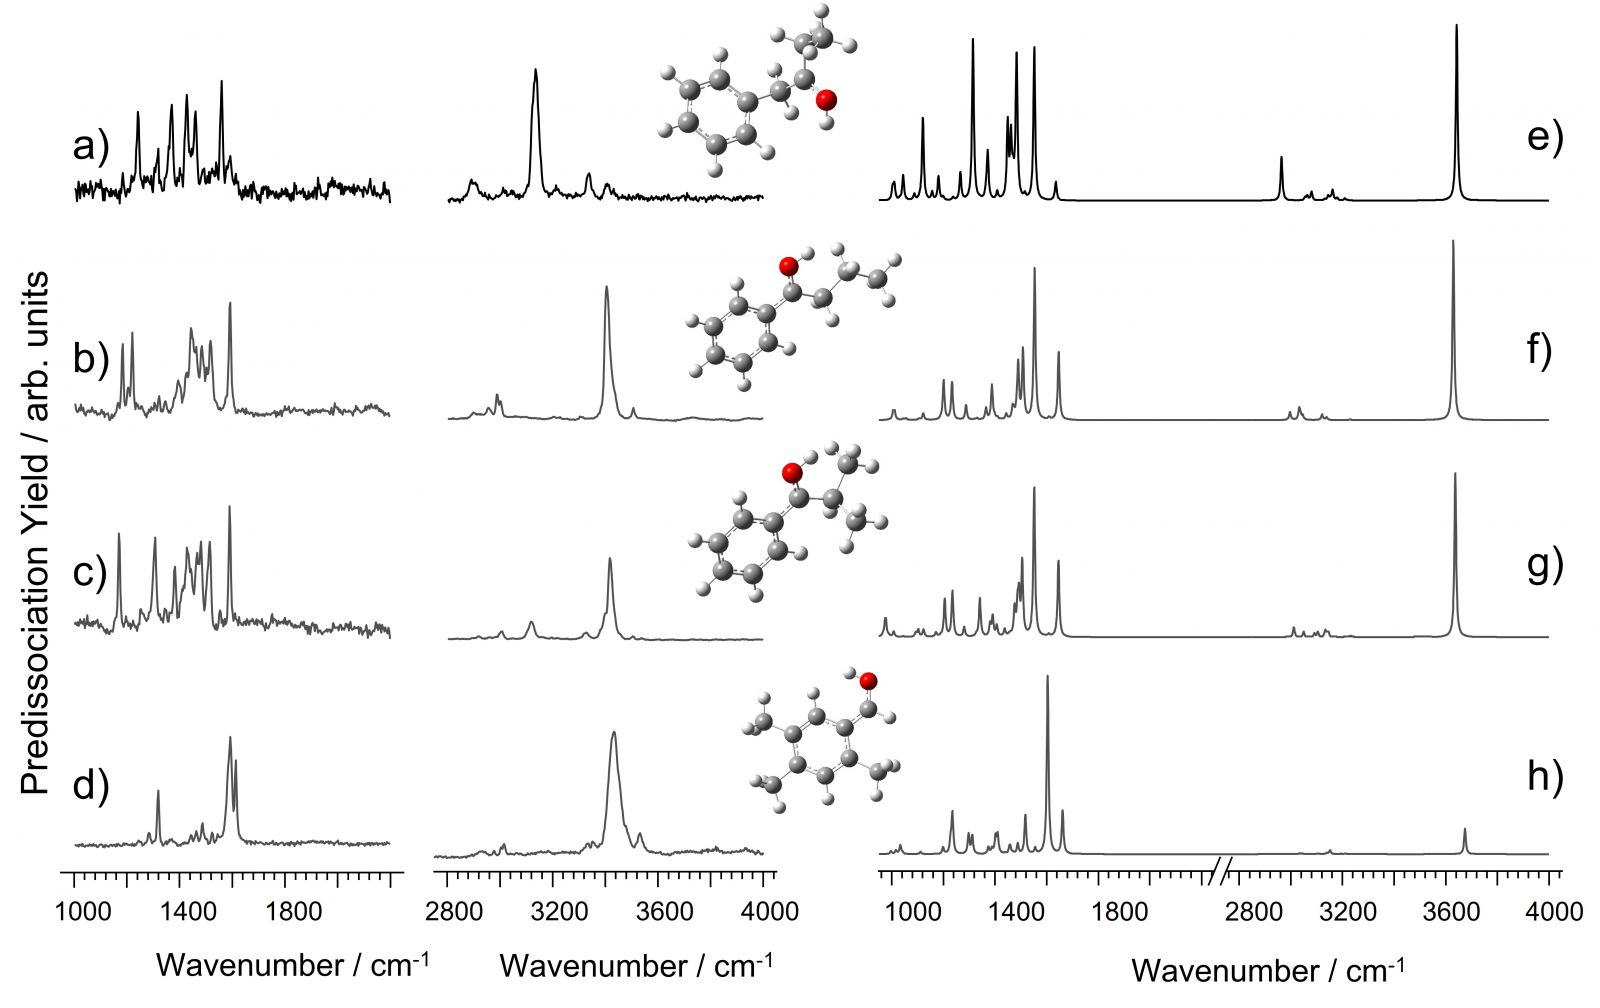 Vibrational spectra of structural isomers of C10H12O+H+